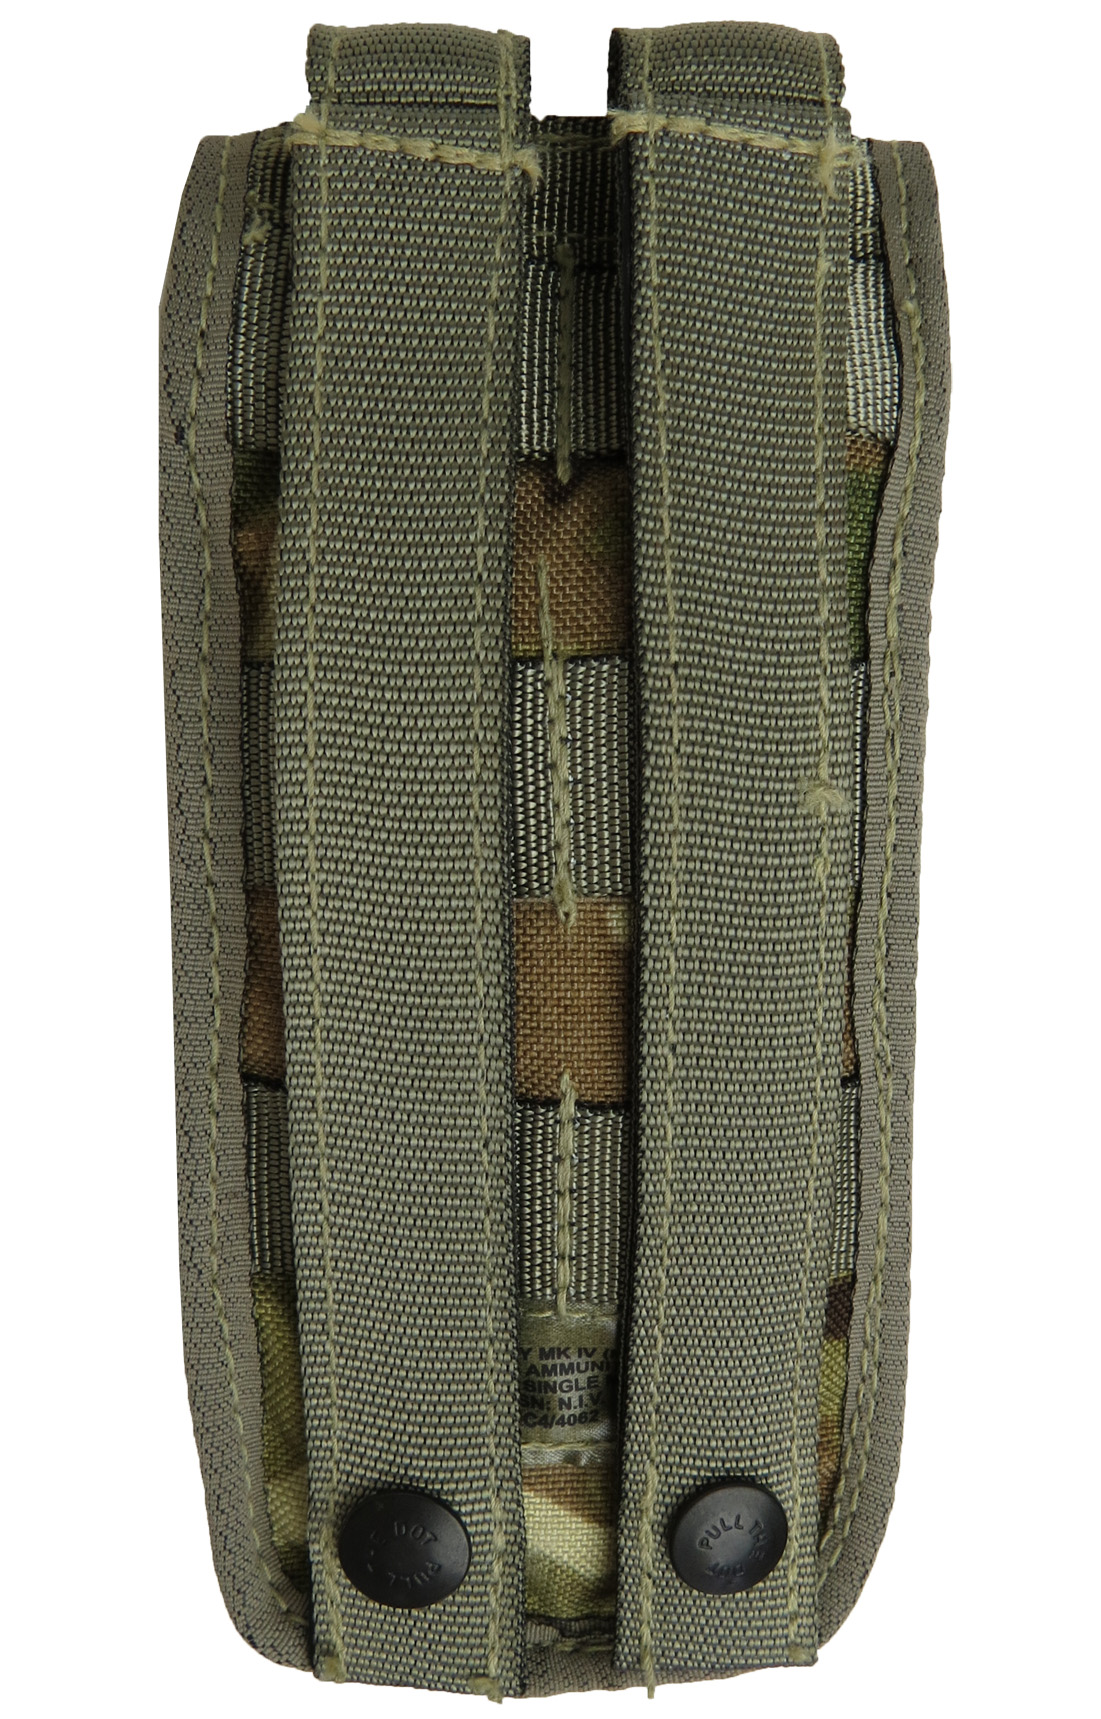 New British Army MTP SA80 Single Ammo Pouch